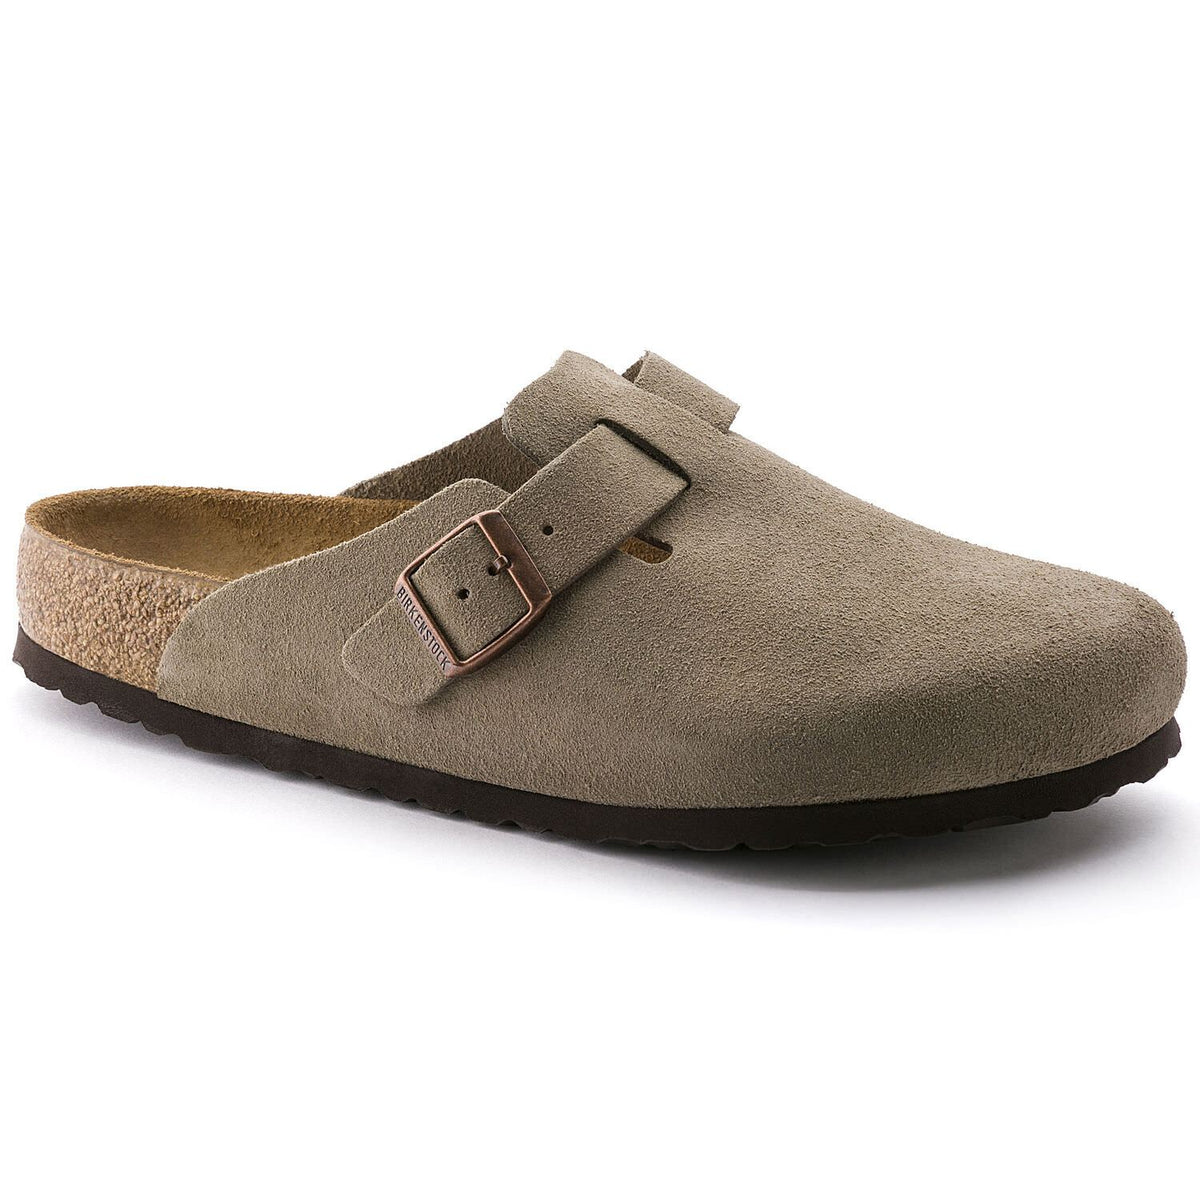 Birkenstock Boston, Narrow Fit, Soft Footbed, Suede Leather, Taupe Clogs Birkenstock Classic Taupe 37 